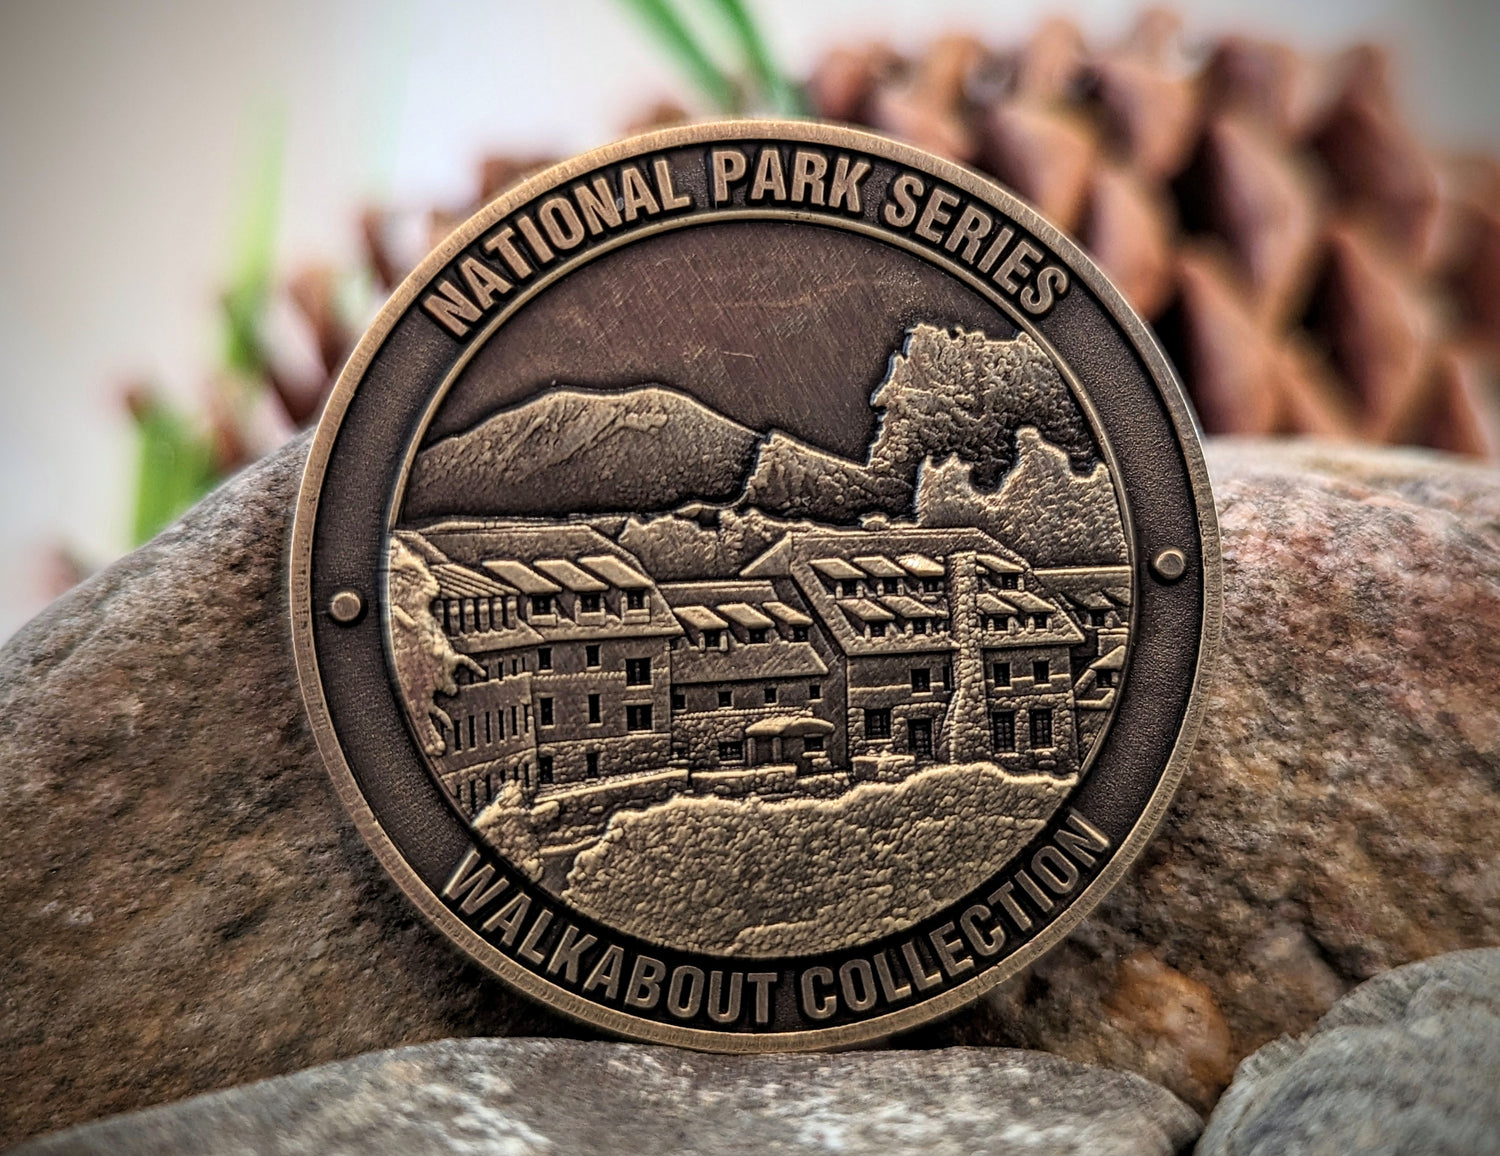 CRATER LAKE NATIONAL PARK CHALLENGE COIN